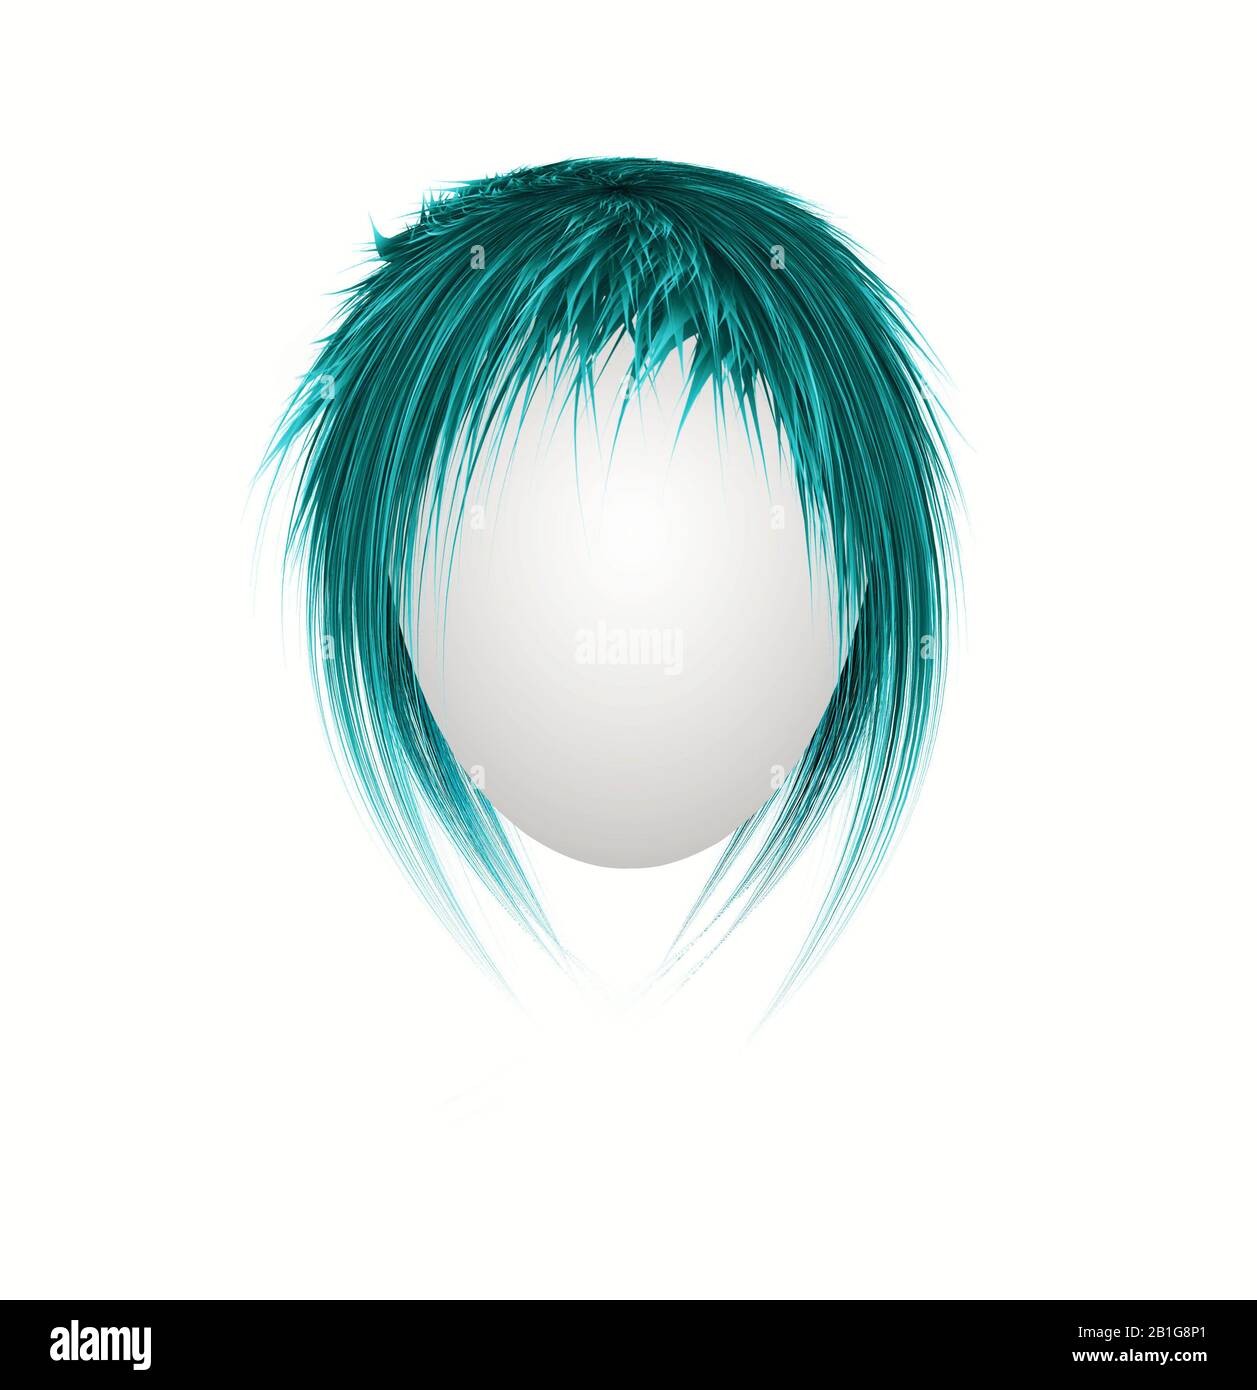 Green artificial hair or wig on white mannequin head Stock Photo